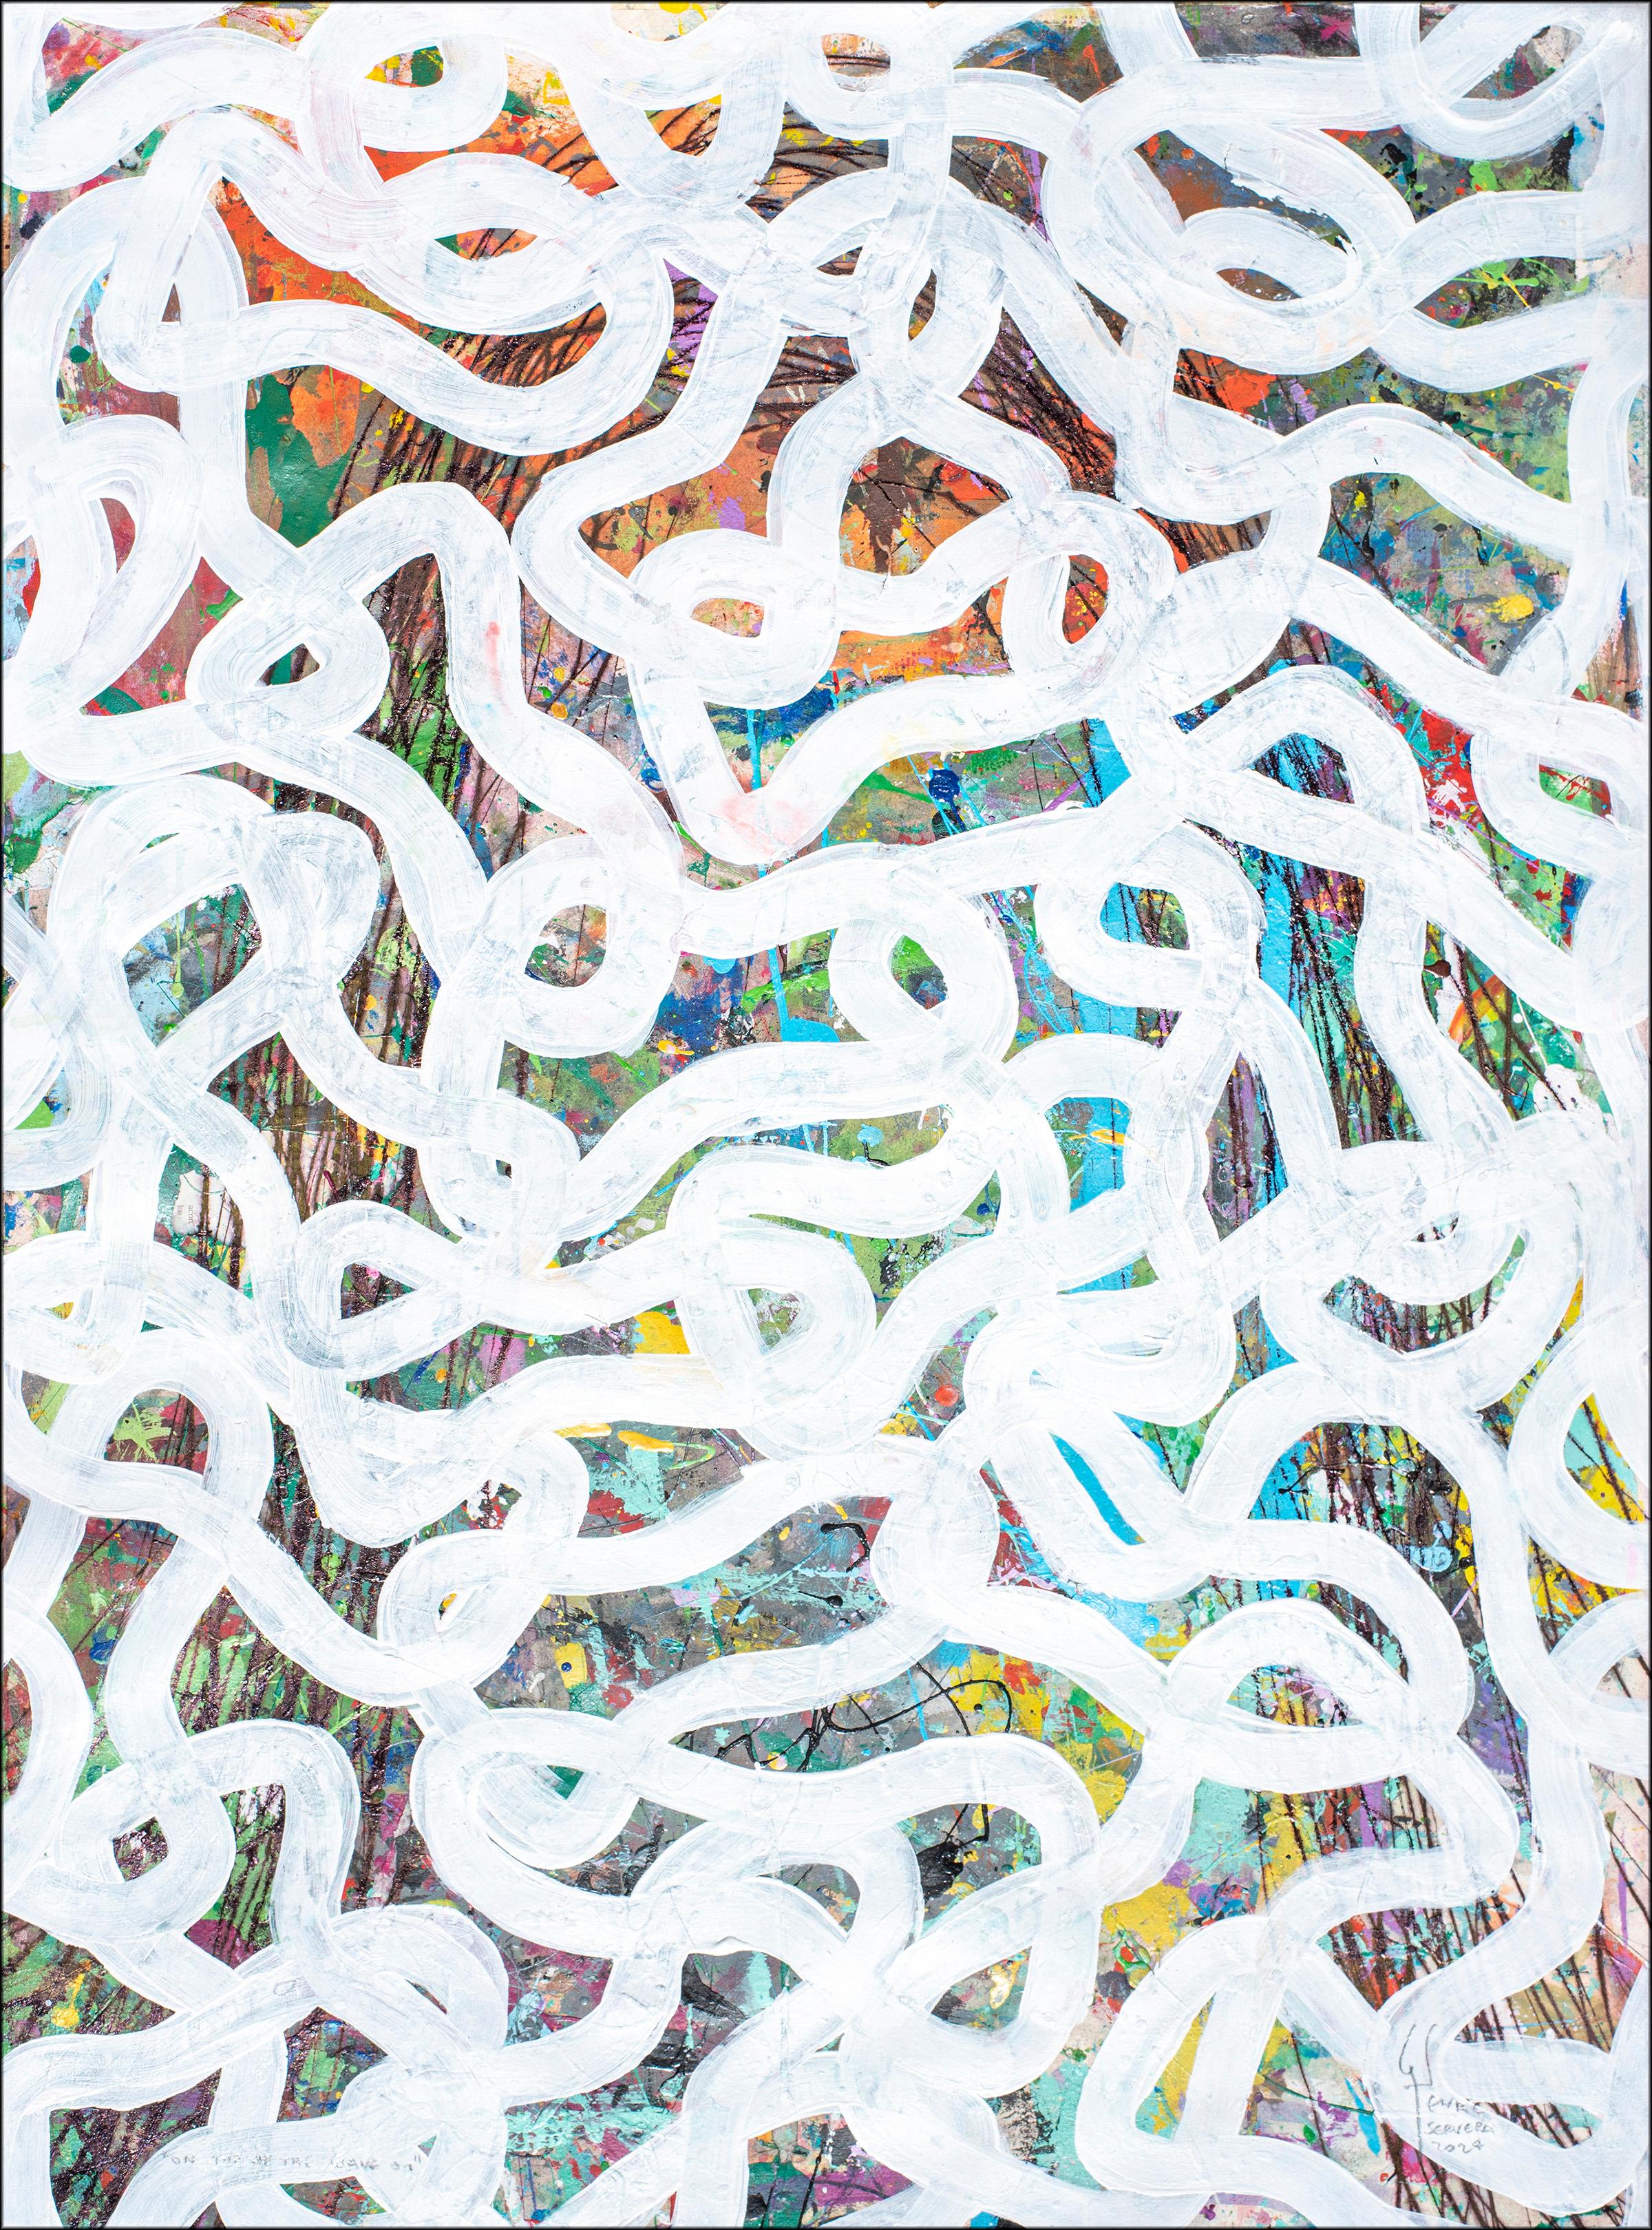 Enric Servera Abstract Painting - On Top of the Wave, Mixed Media on Paper, White Fish Drawing Patterns Colorful